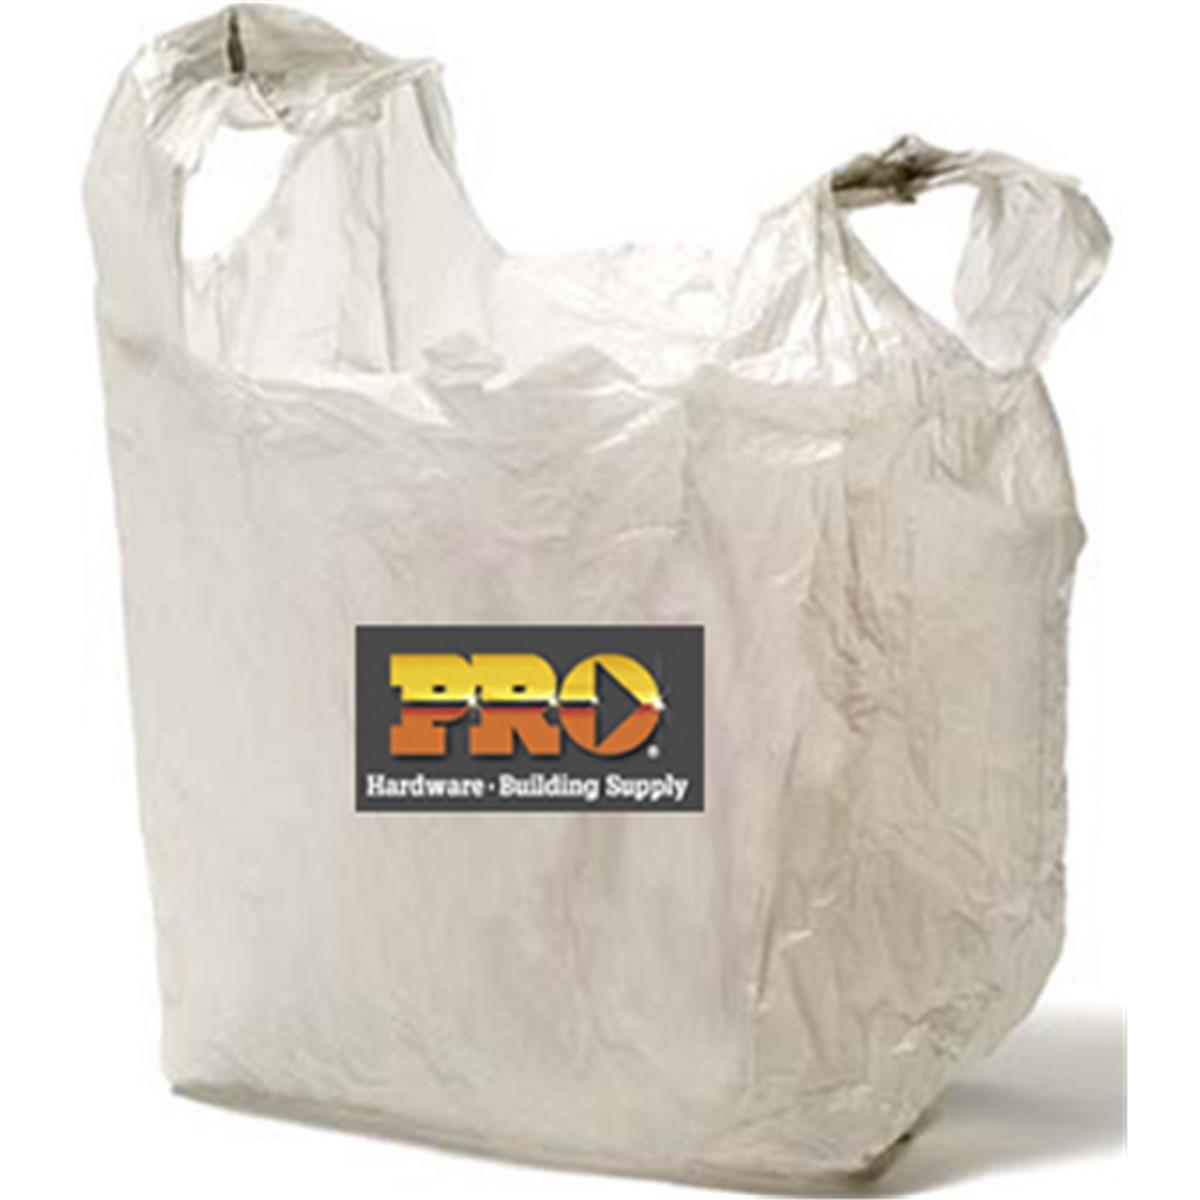 Rollmate Large Pro Plastic Bags - 1600 Count